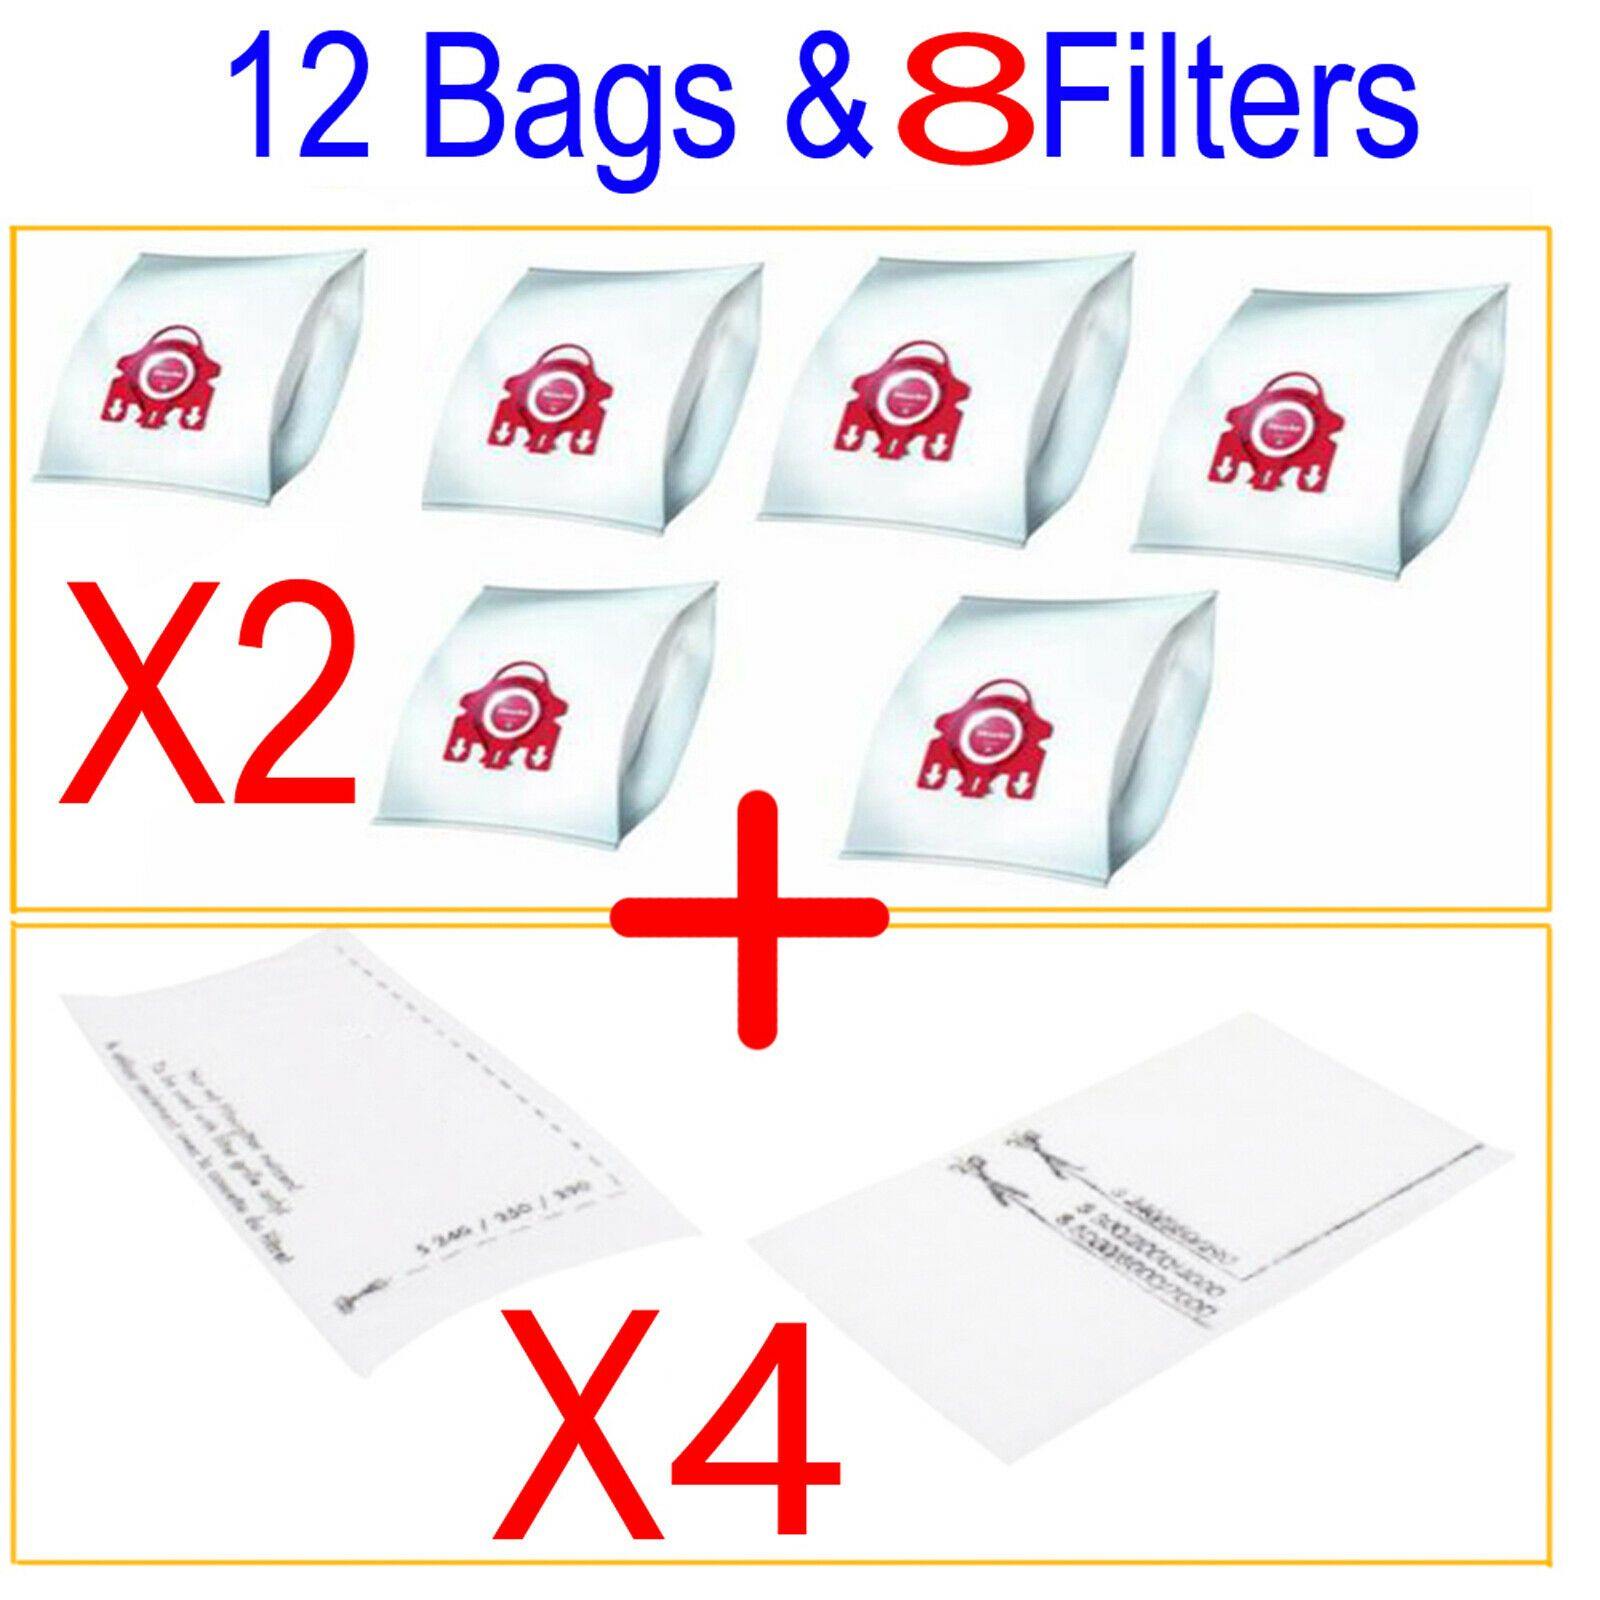 12 Synthetic Dust Bags & 8 Filters For Miele S312i Festival S318 MediVac S324 Sparesbarn